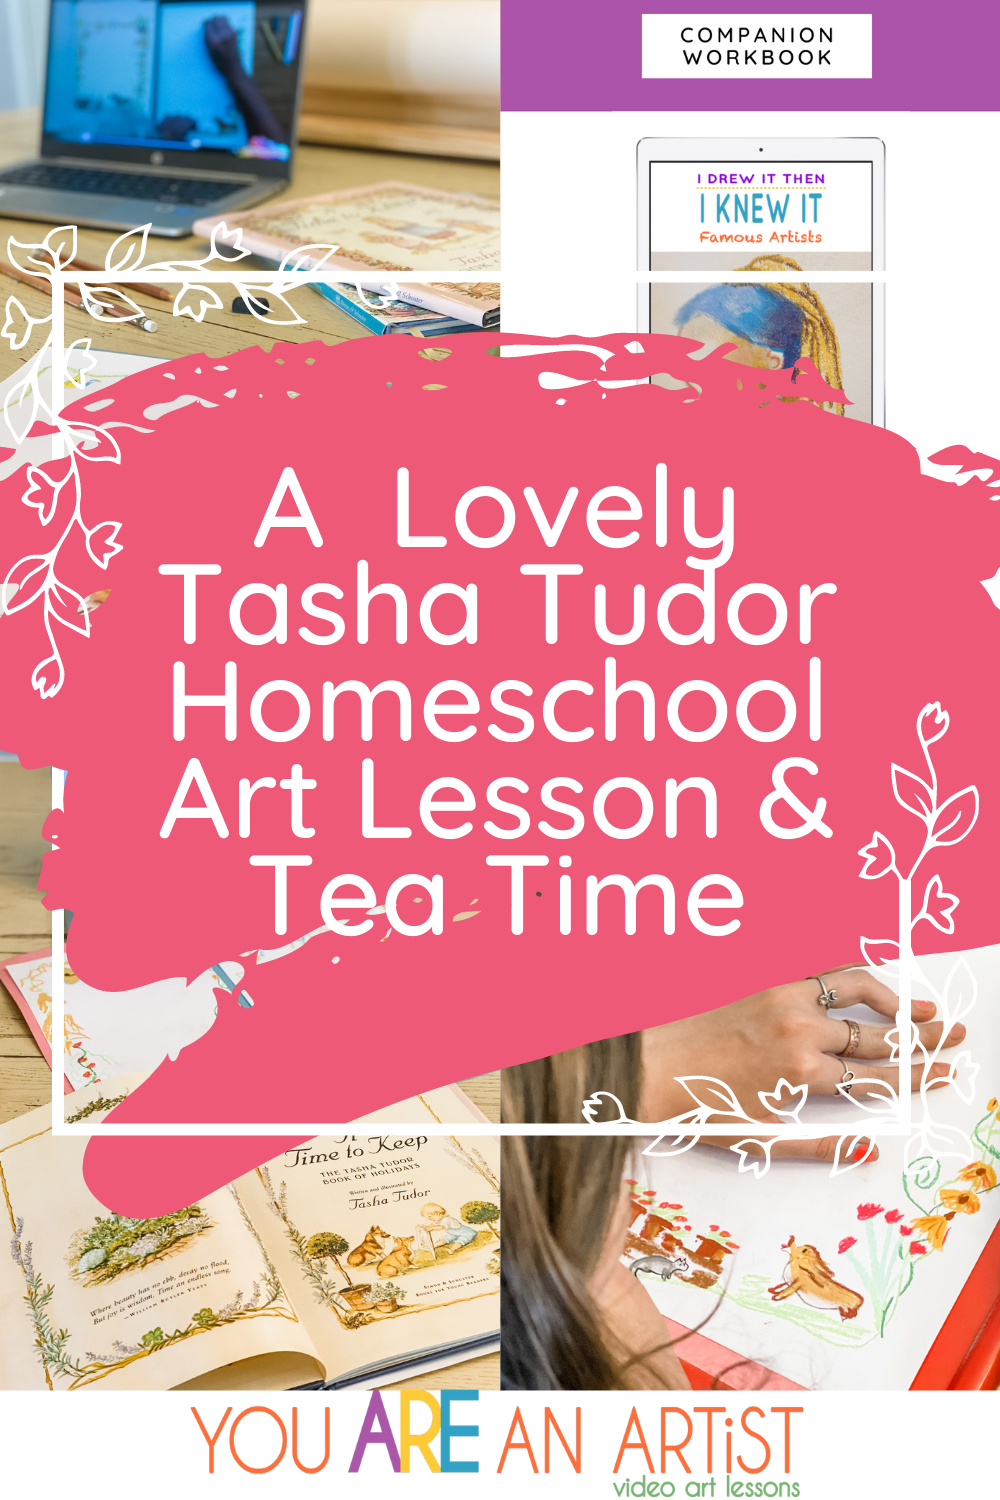 Learn more about famous artists like Tasha Tudor in your homeschool with art lessons, tea time, and other exciting resources. #homeschoolart #tashatudor #onlineartlessons #artforkids